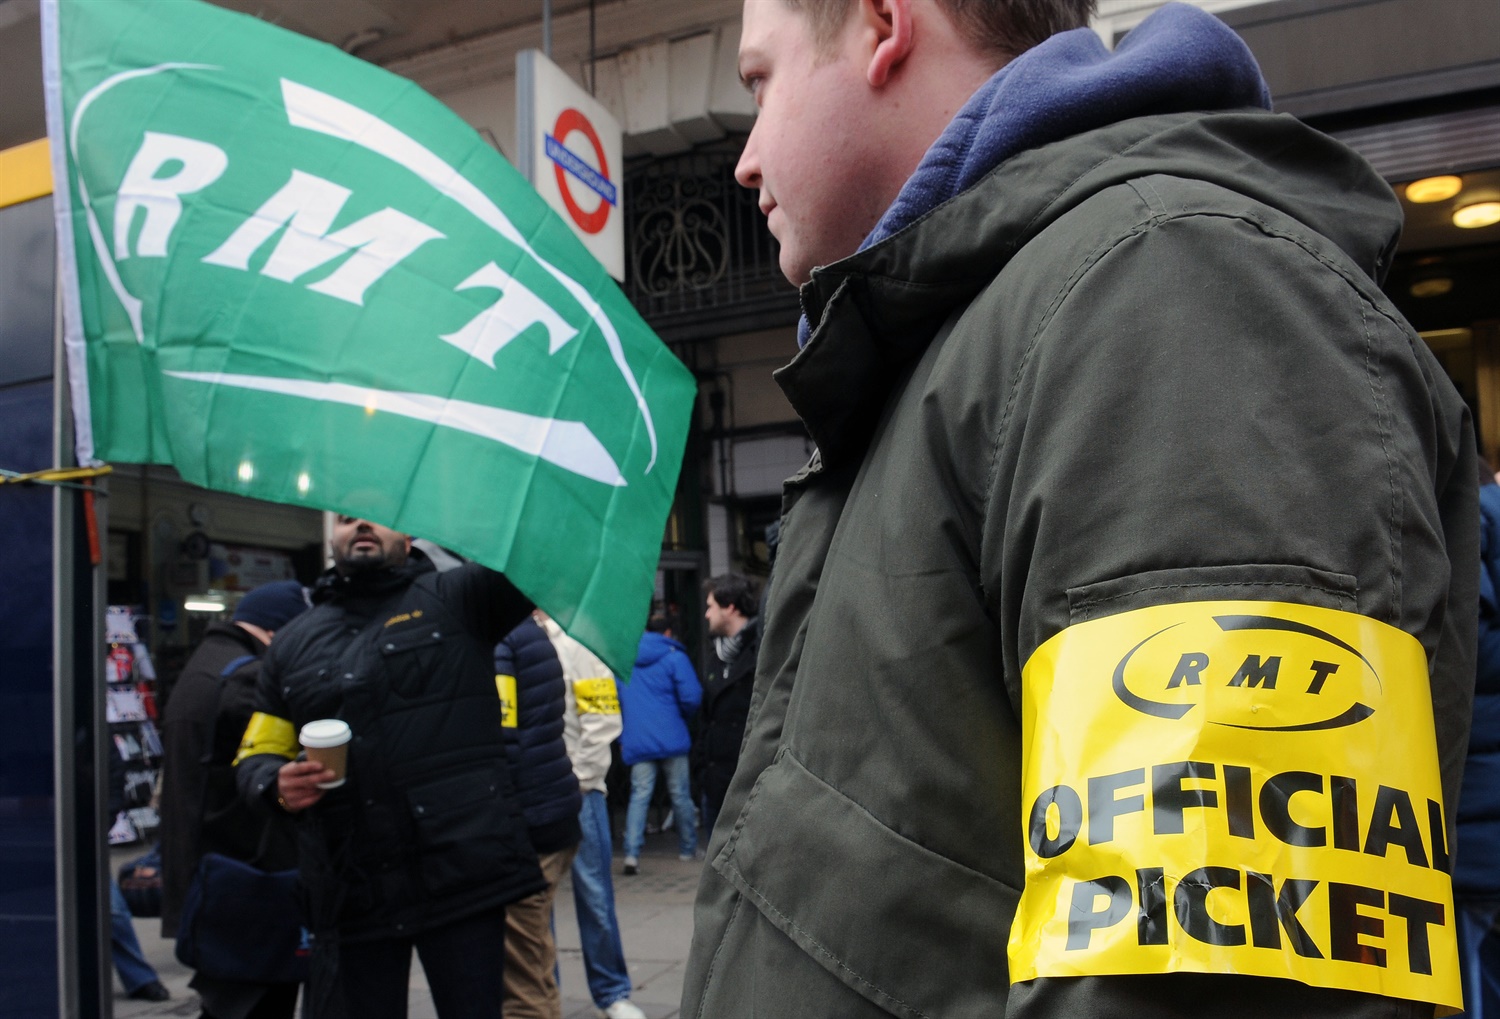 National rail strike back on as RMT rejects pay offer